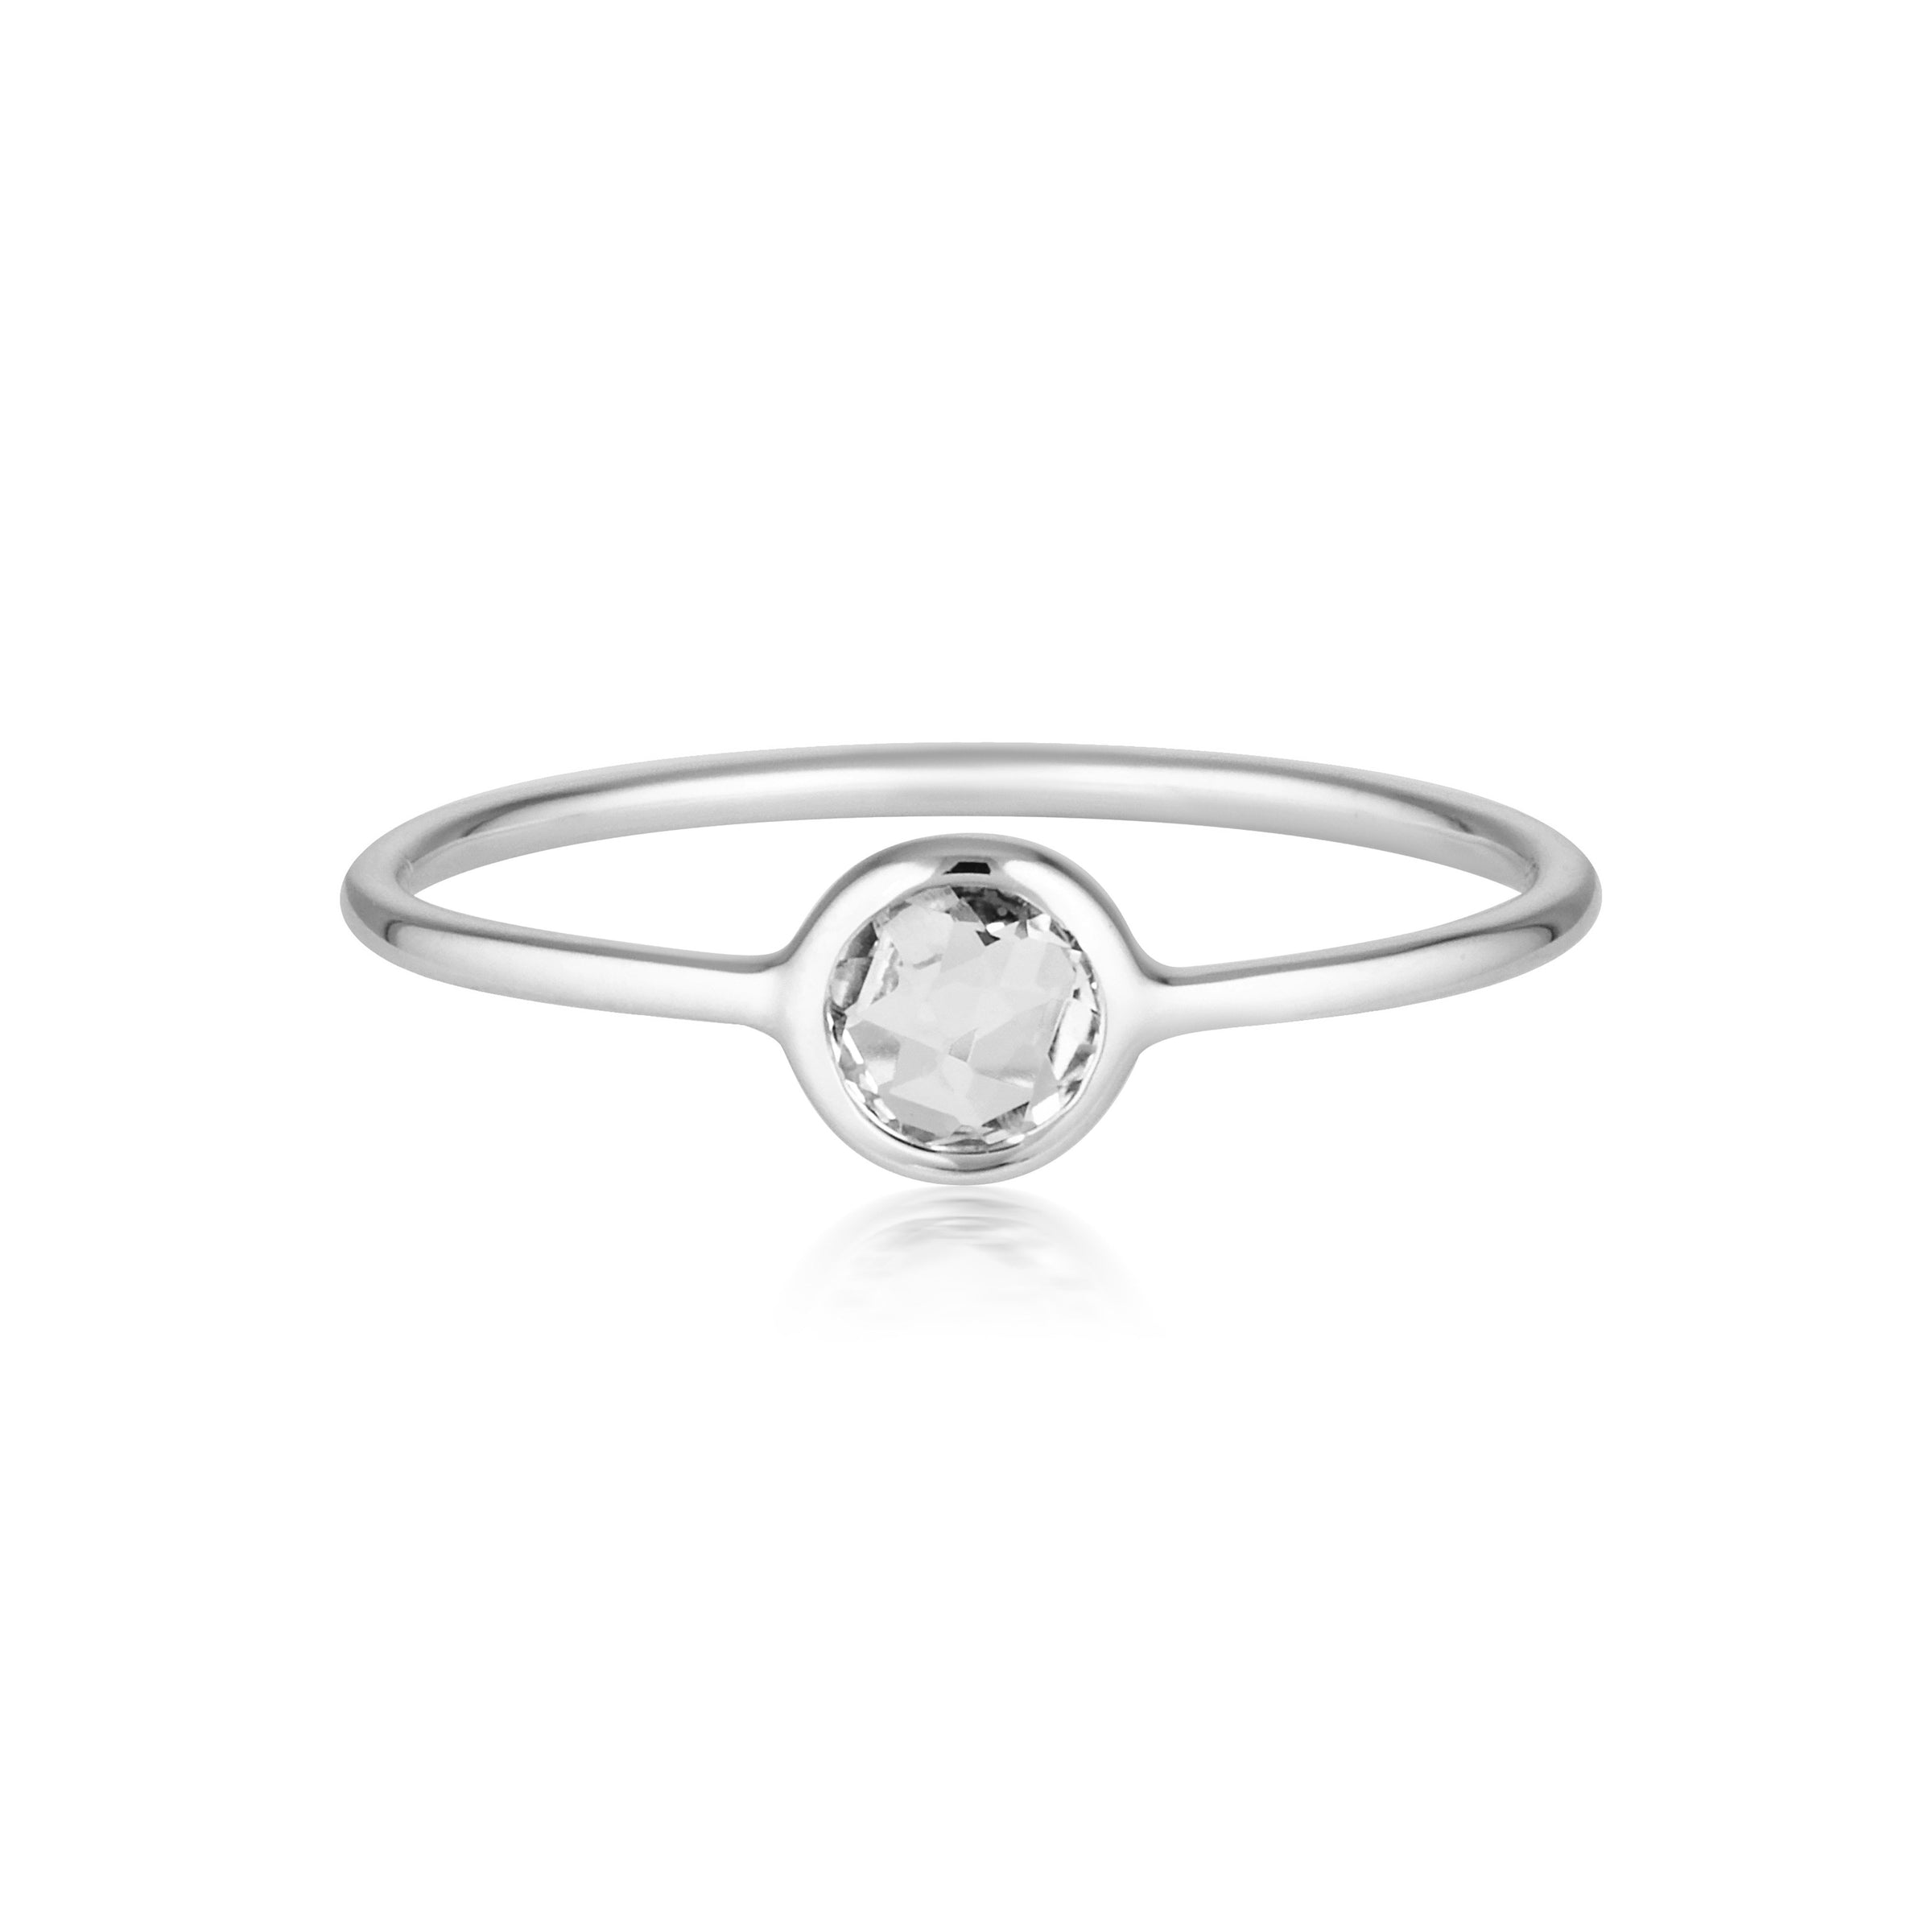 Georgini - Eos Sterling Silver White Topaz Ring Bevilles Jewellers 9 